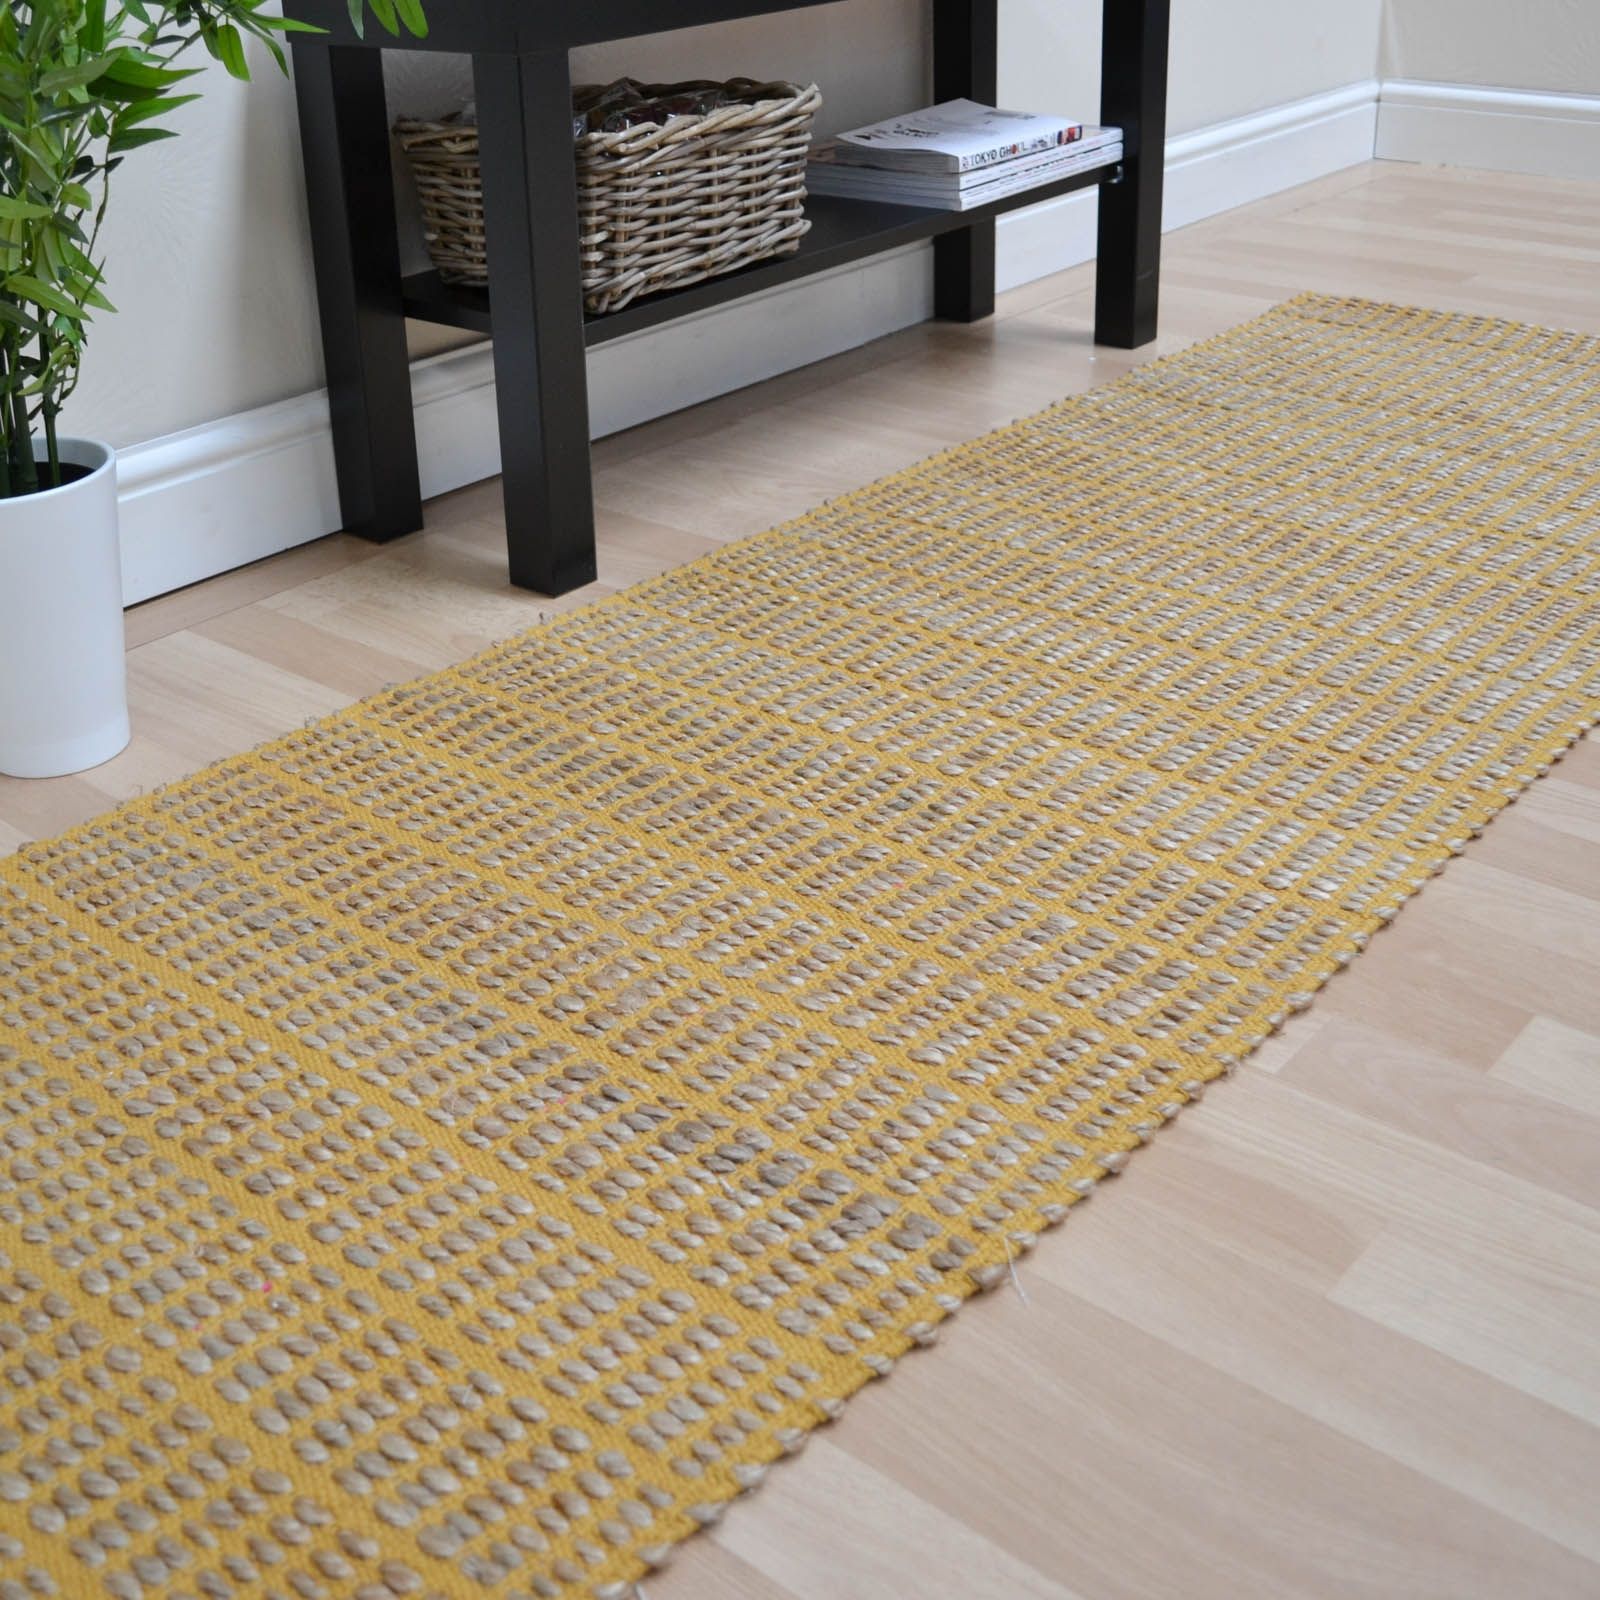 Hall Rugs Uk Roselawnlutheran With Hall Runners And Rugs (View 5 of 20)